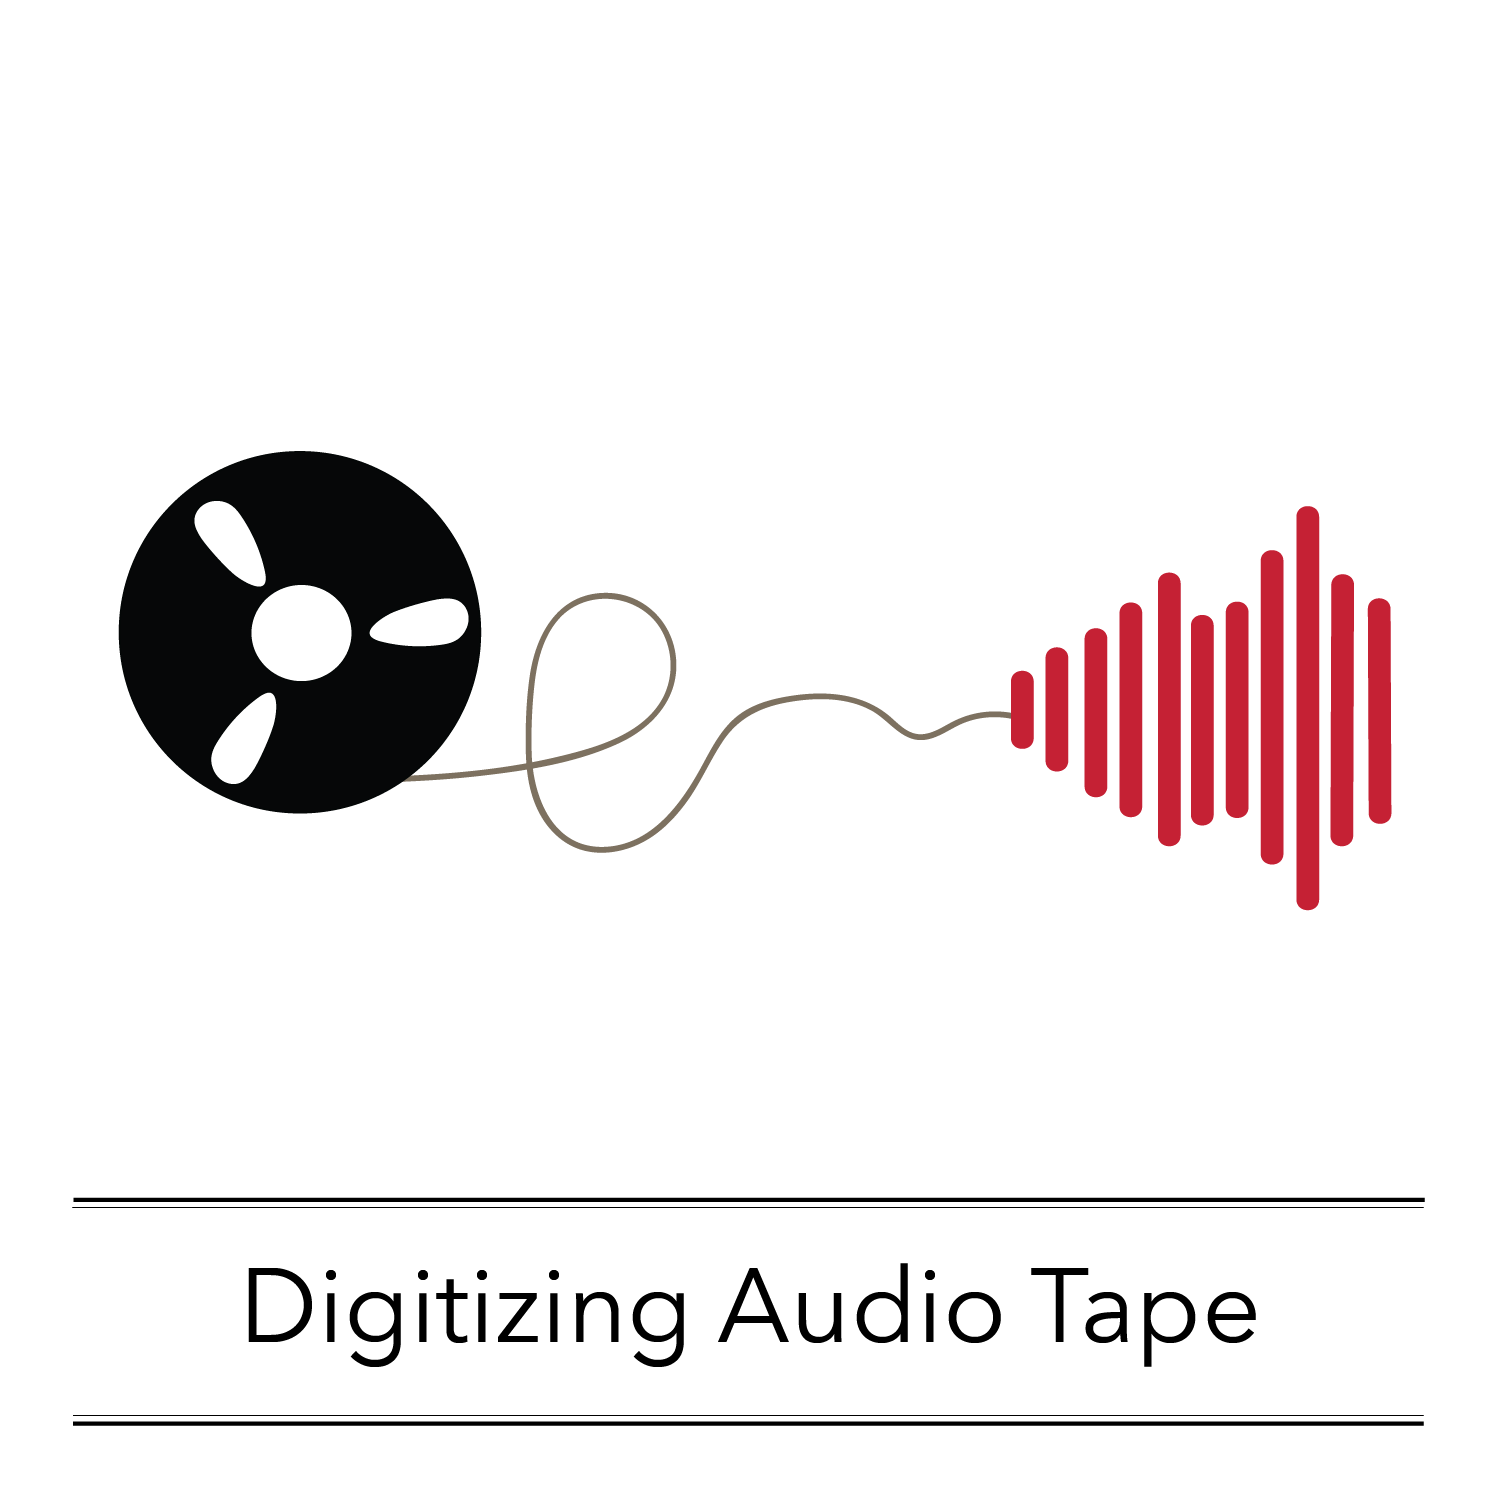 OHC workshop icon: A reel of audio tape unspools, the end of the tape transforming to a digital waveform. Text under image reads: Digitizing Audio Tape.